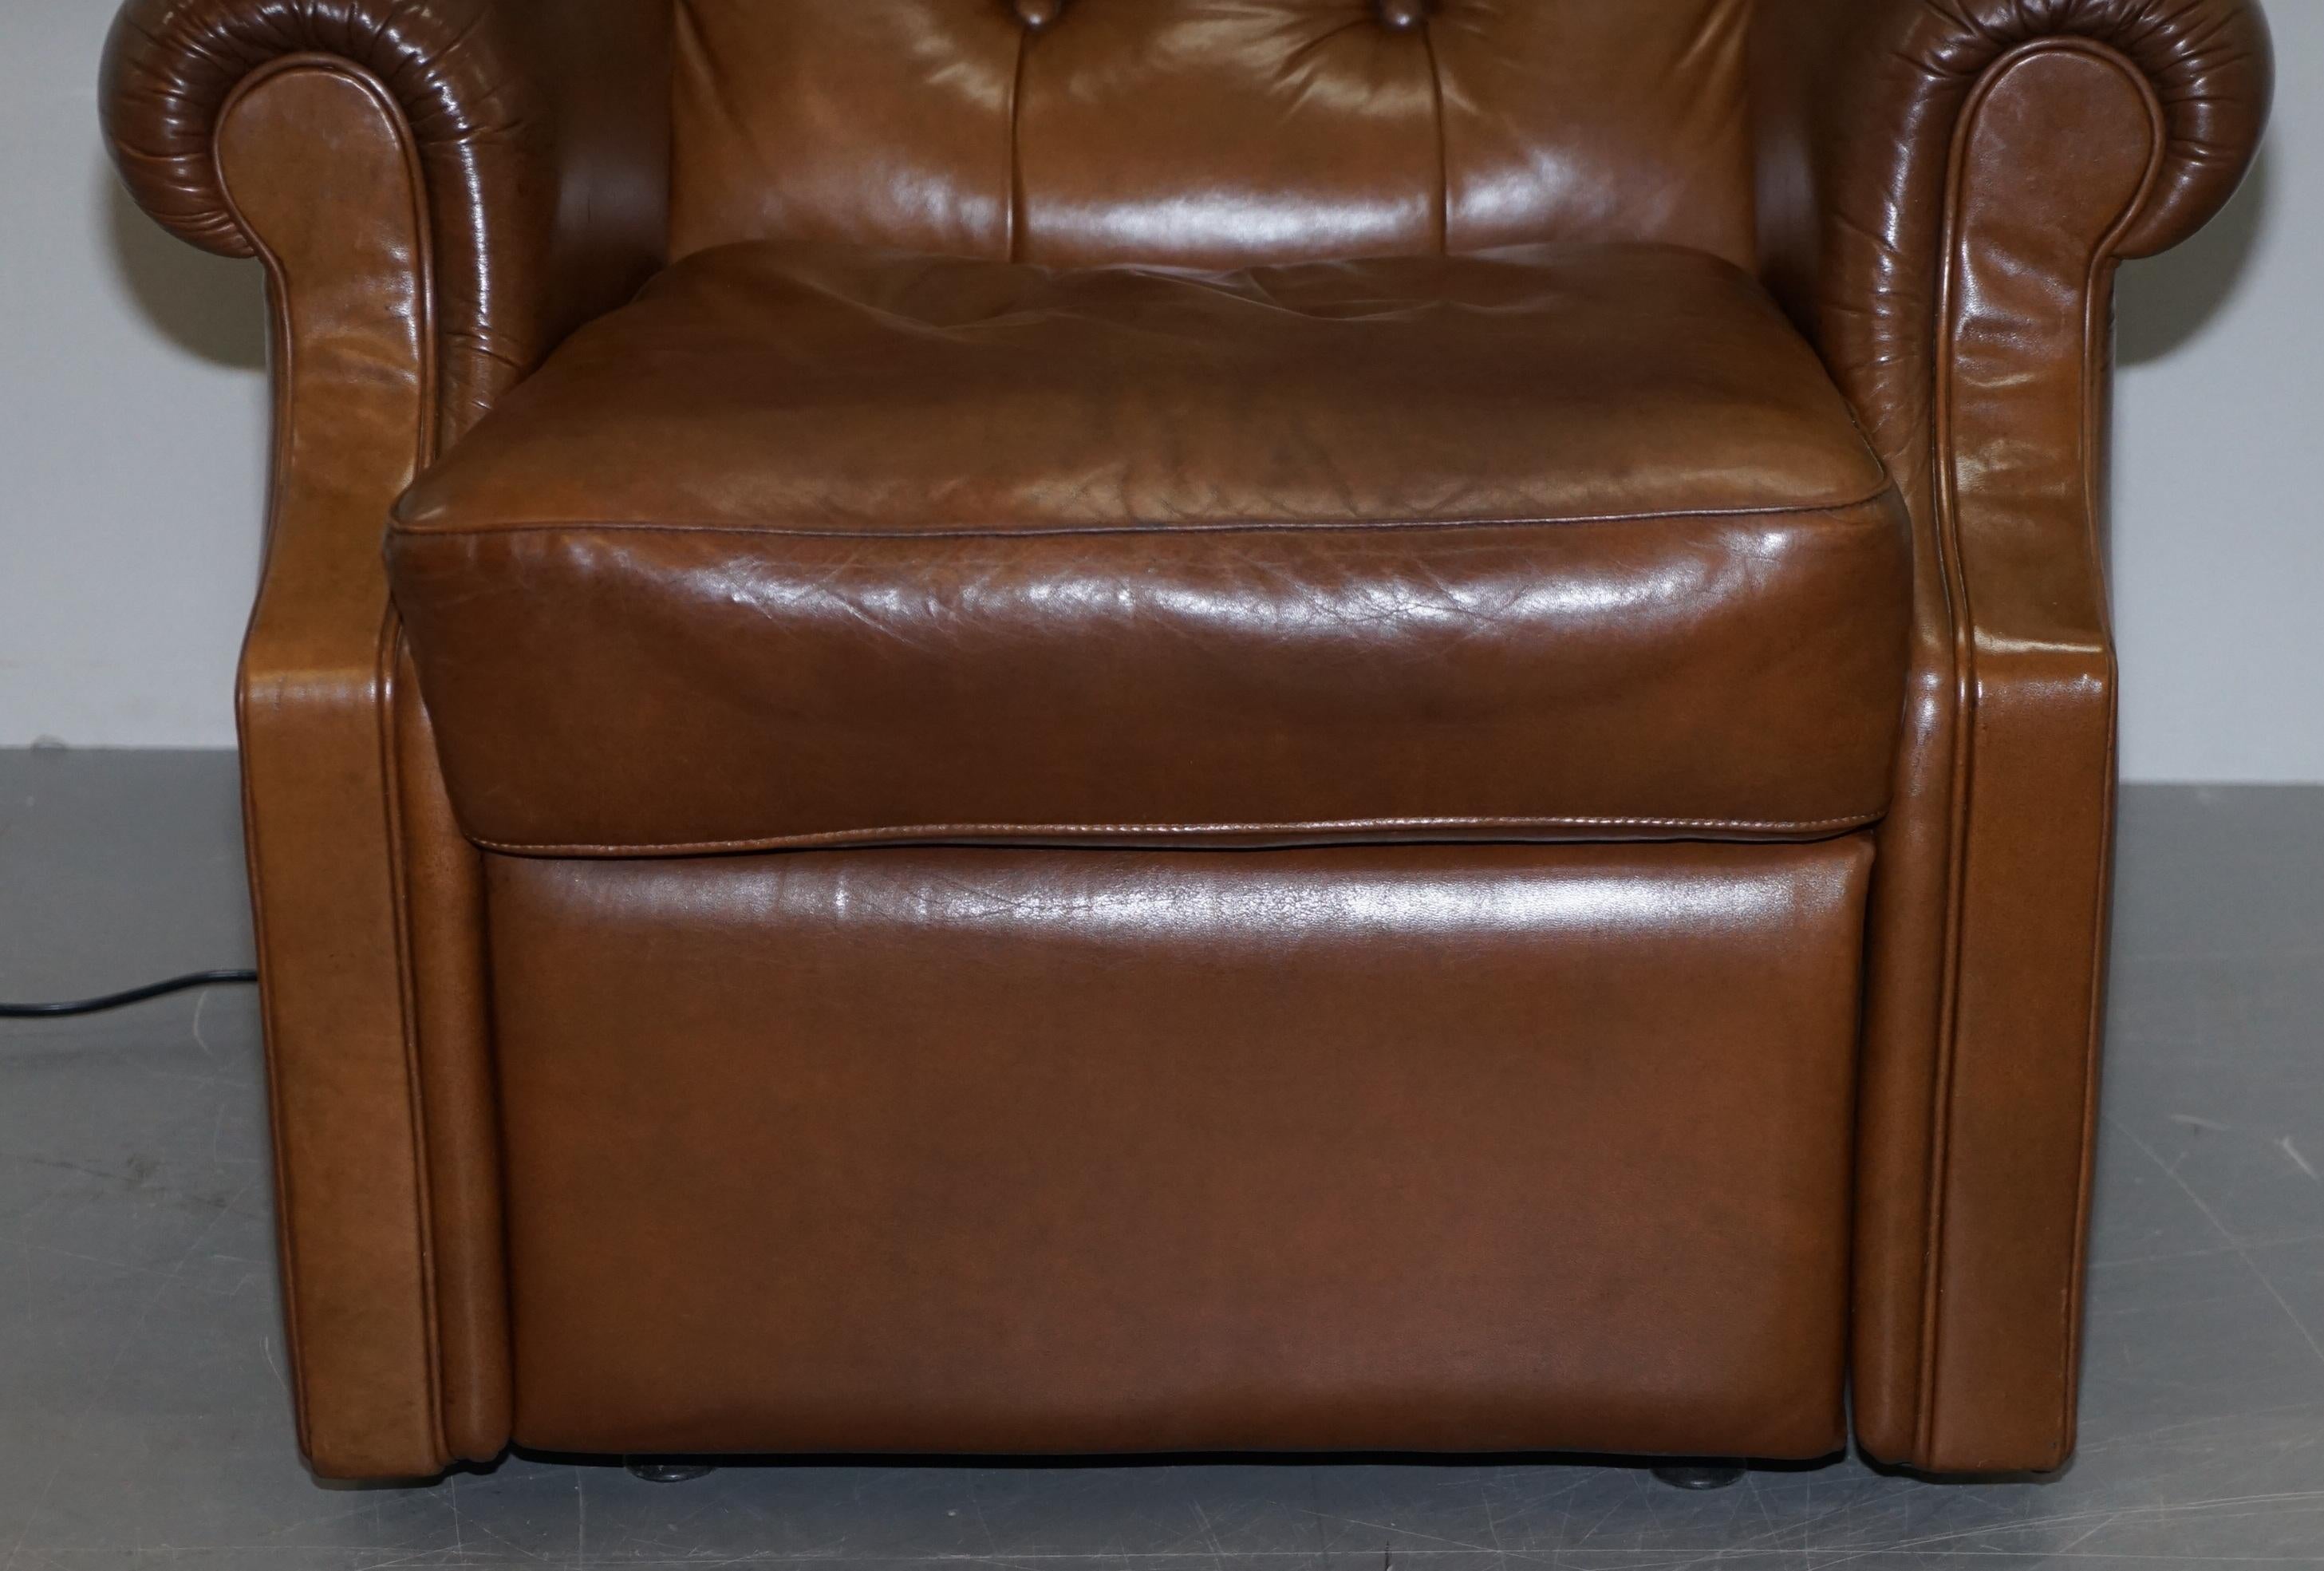 Lovely Tan Brown Leather Chesterfield Electric Relciner Armchair Comfortable!!!! 3